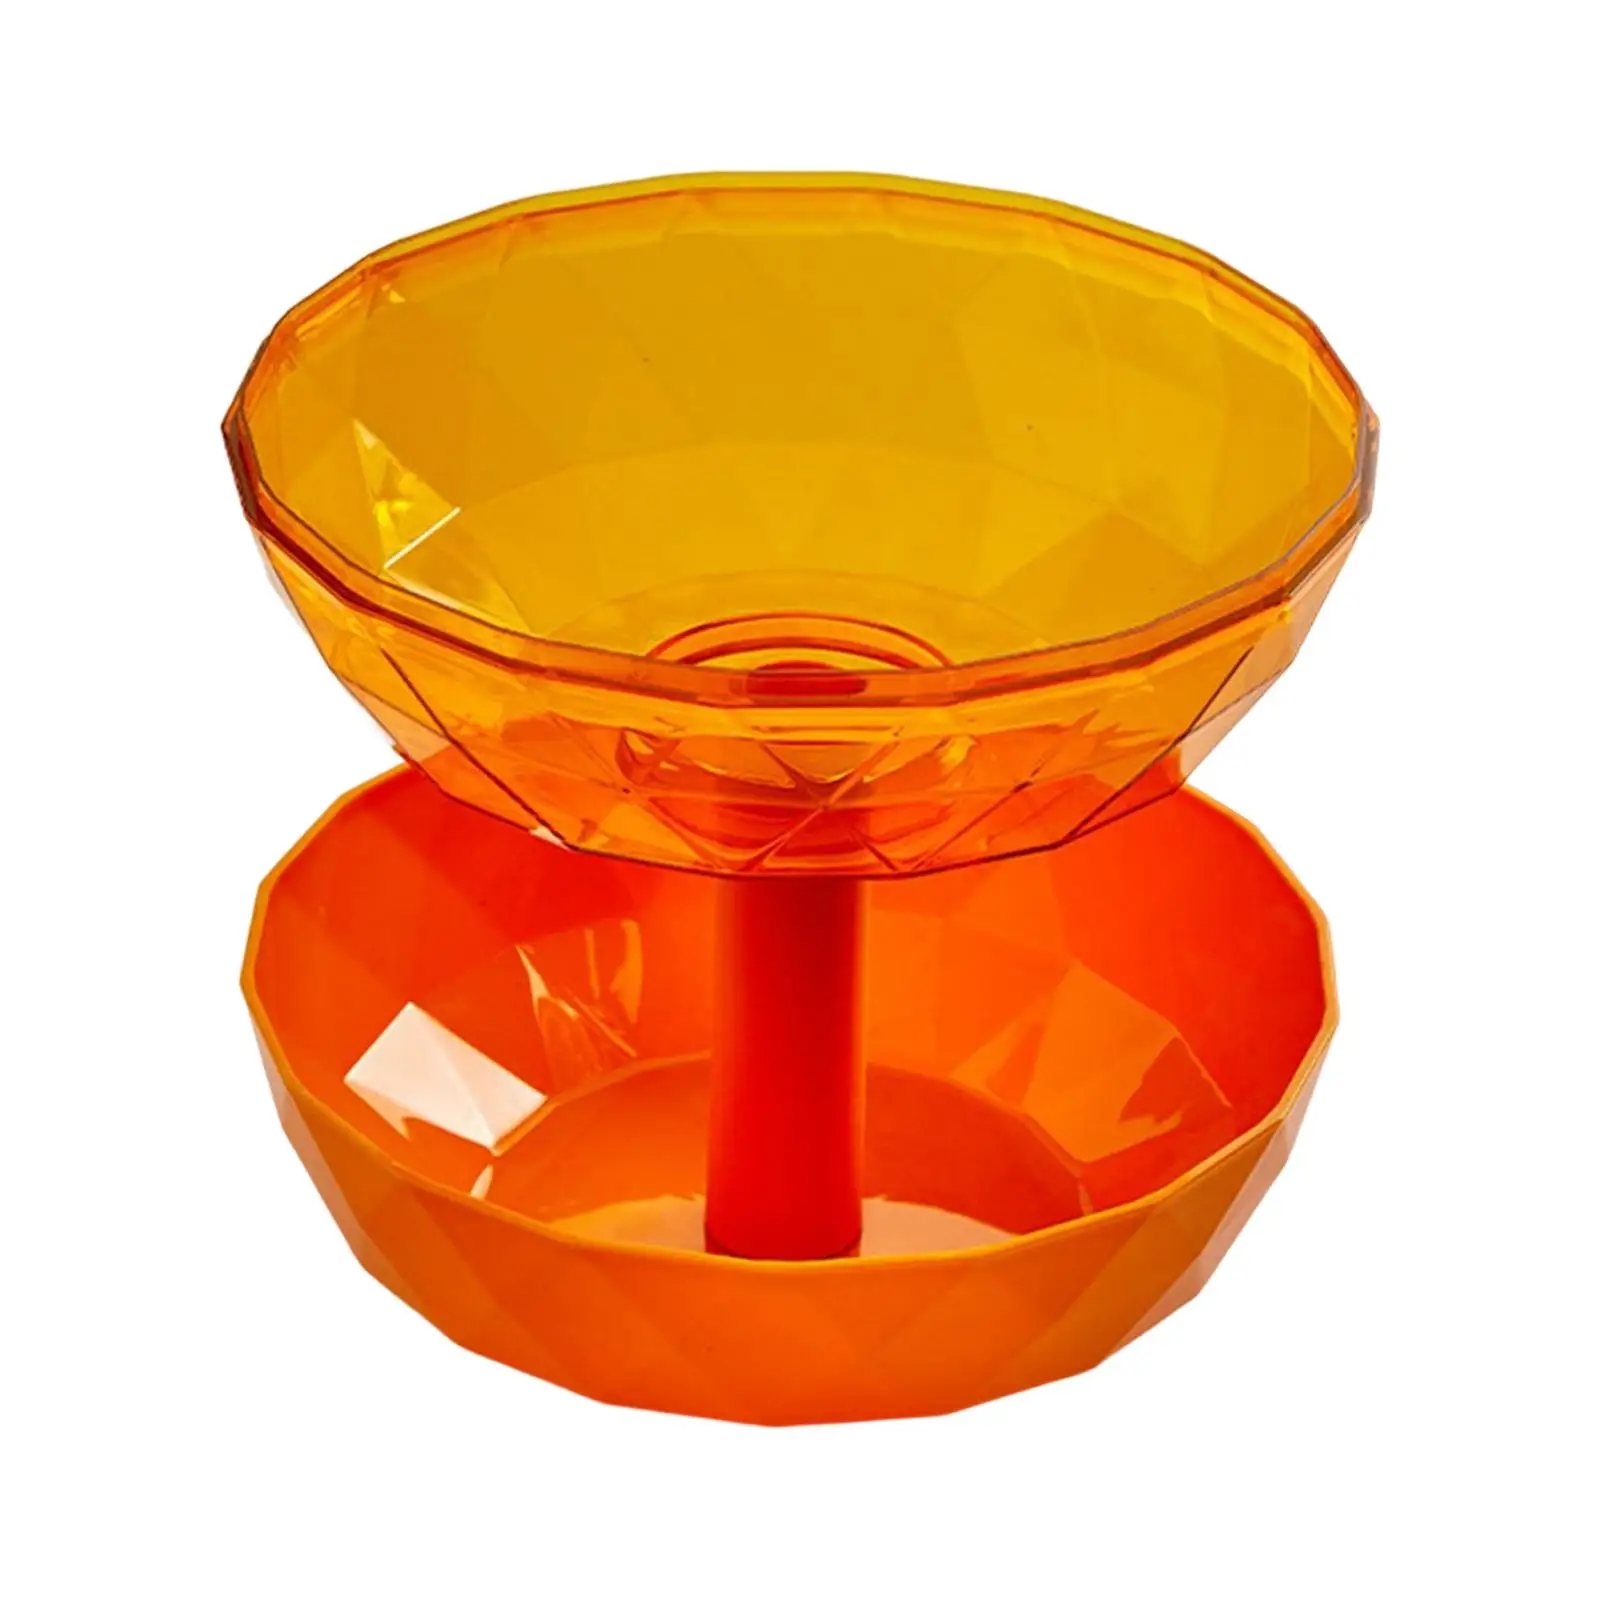 Fruit Bowl Vegetables Holder Organizer Sturdy Two Tiered Tray Fruit Storage Basket for Table Office Countertop Kitchen